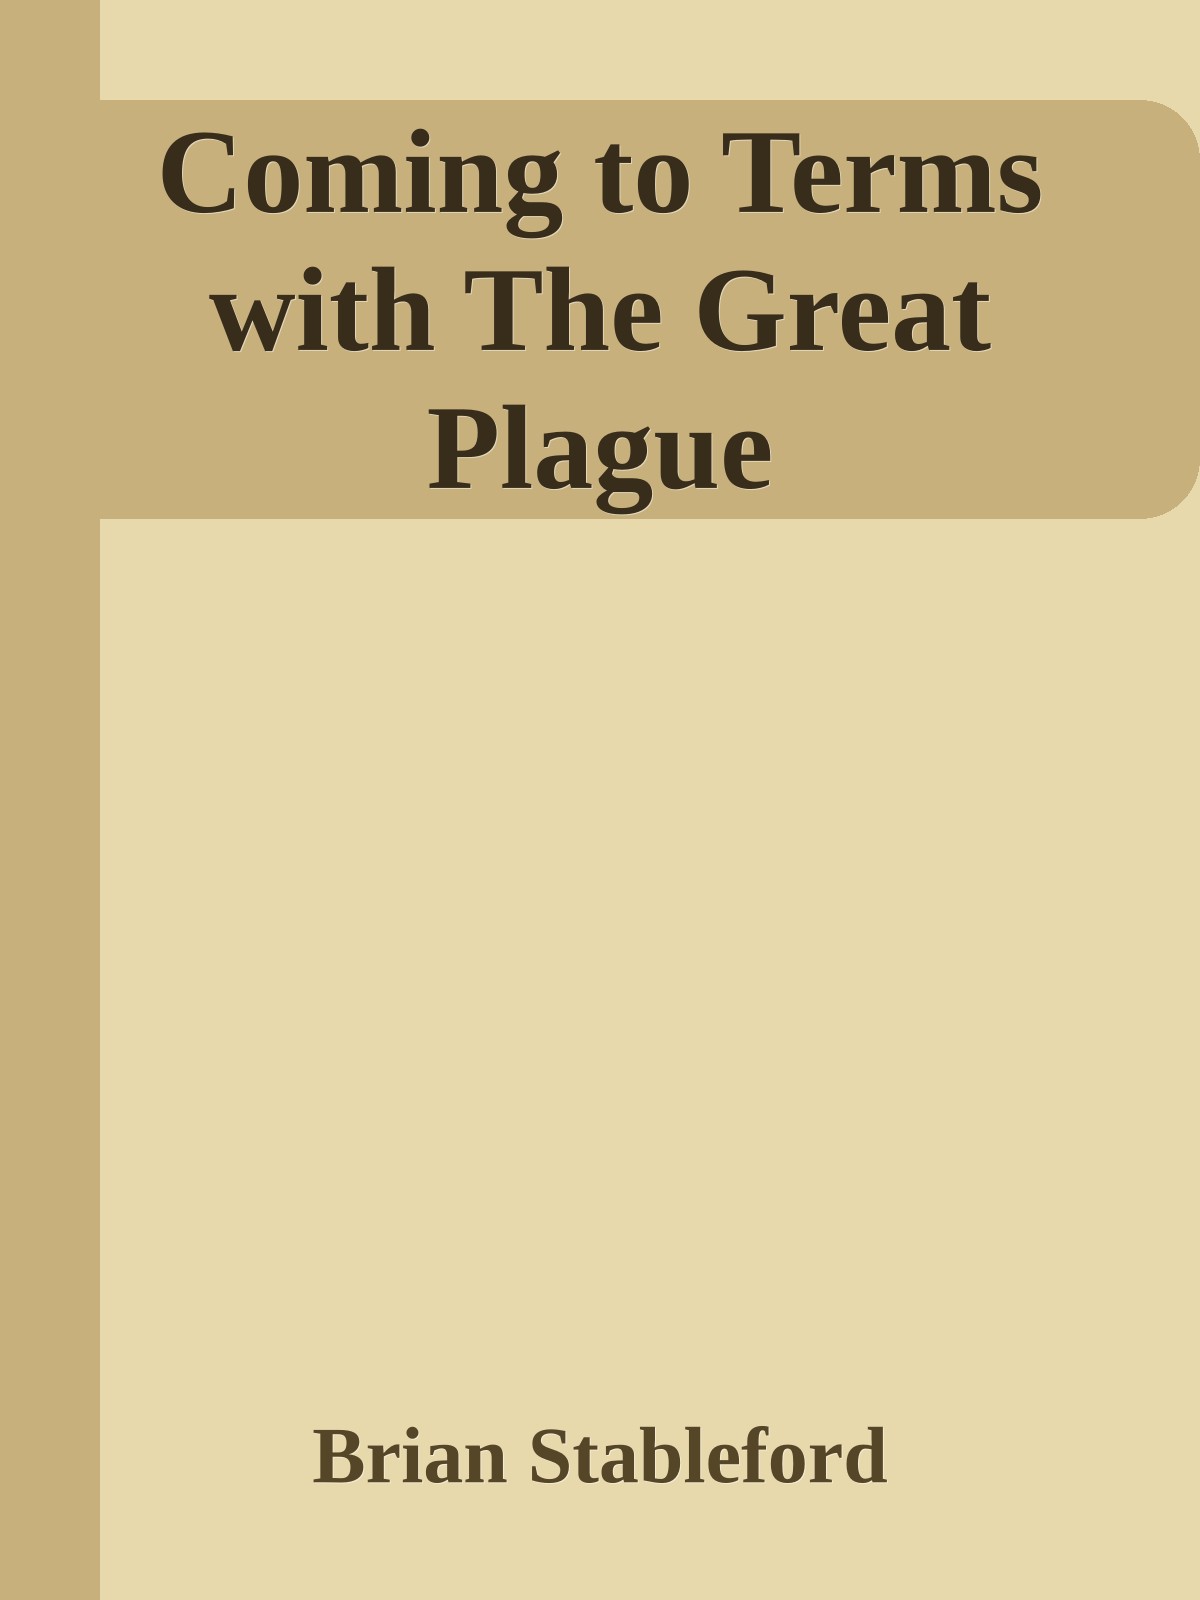 Coming to Terms with The Great Plague